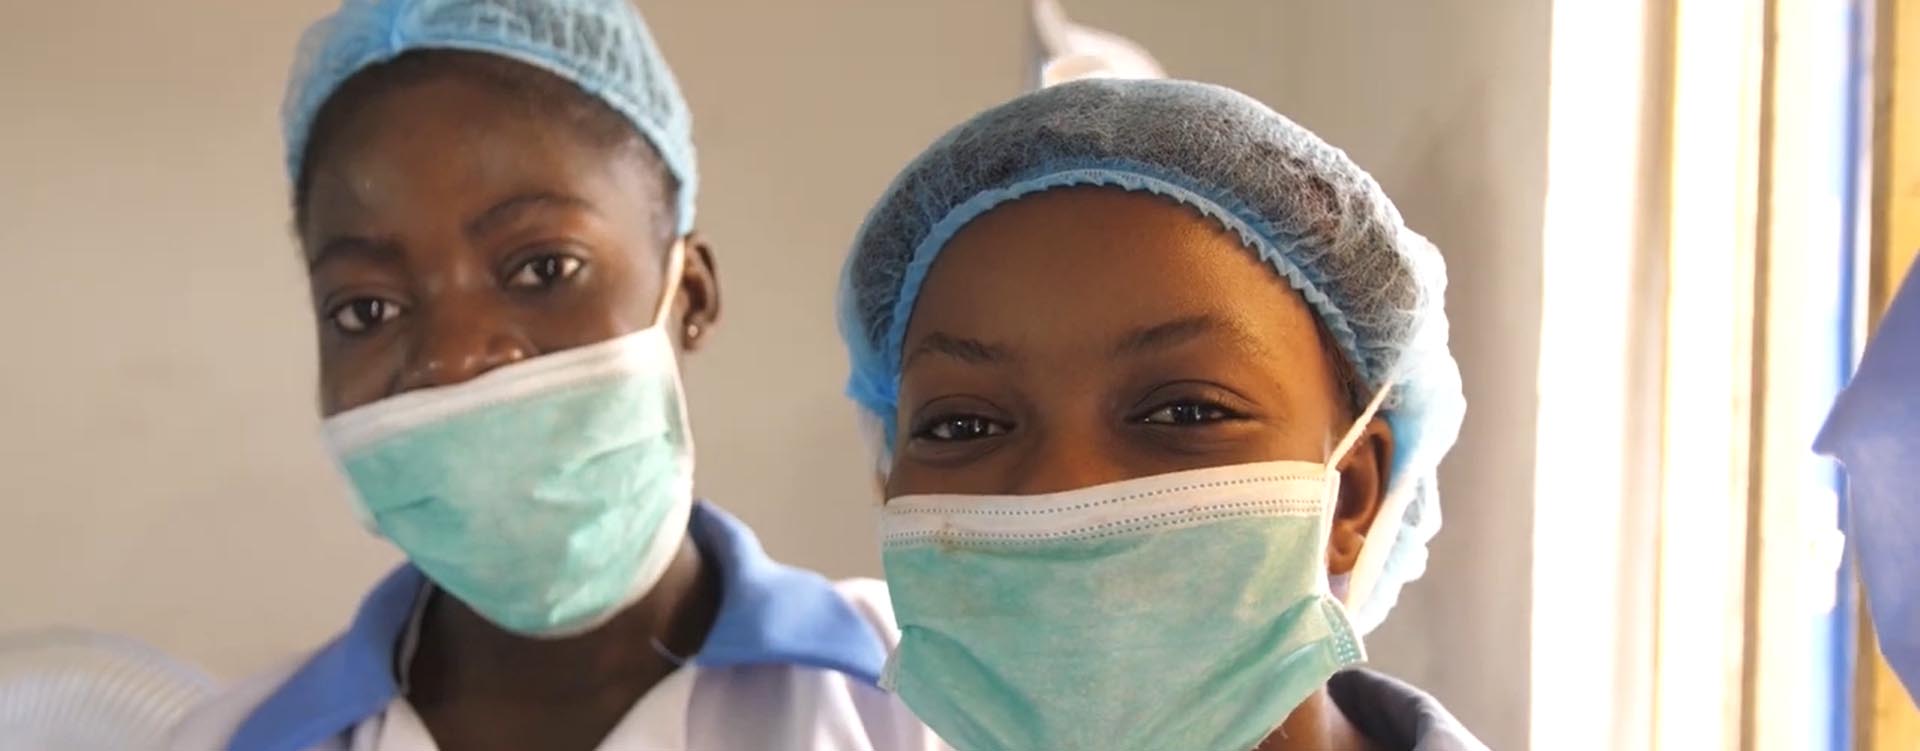 Two Ethiopian health care workers